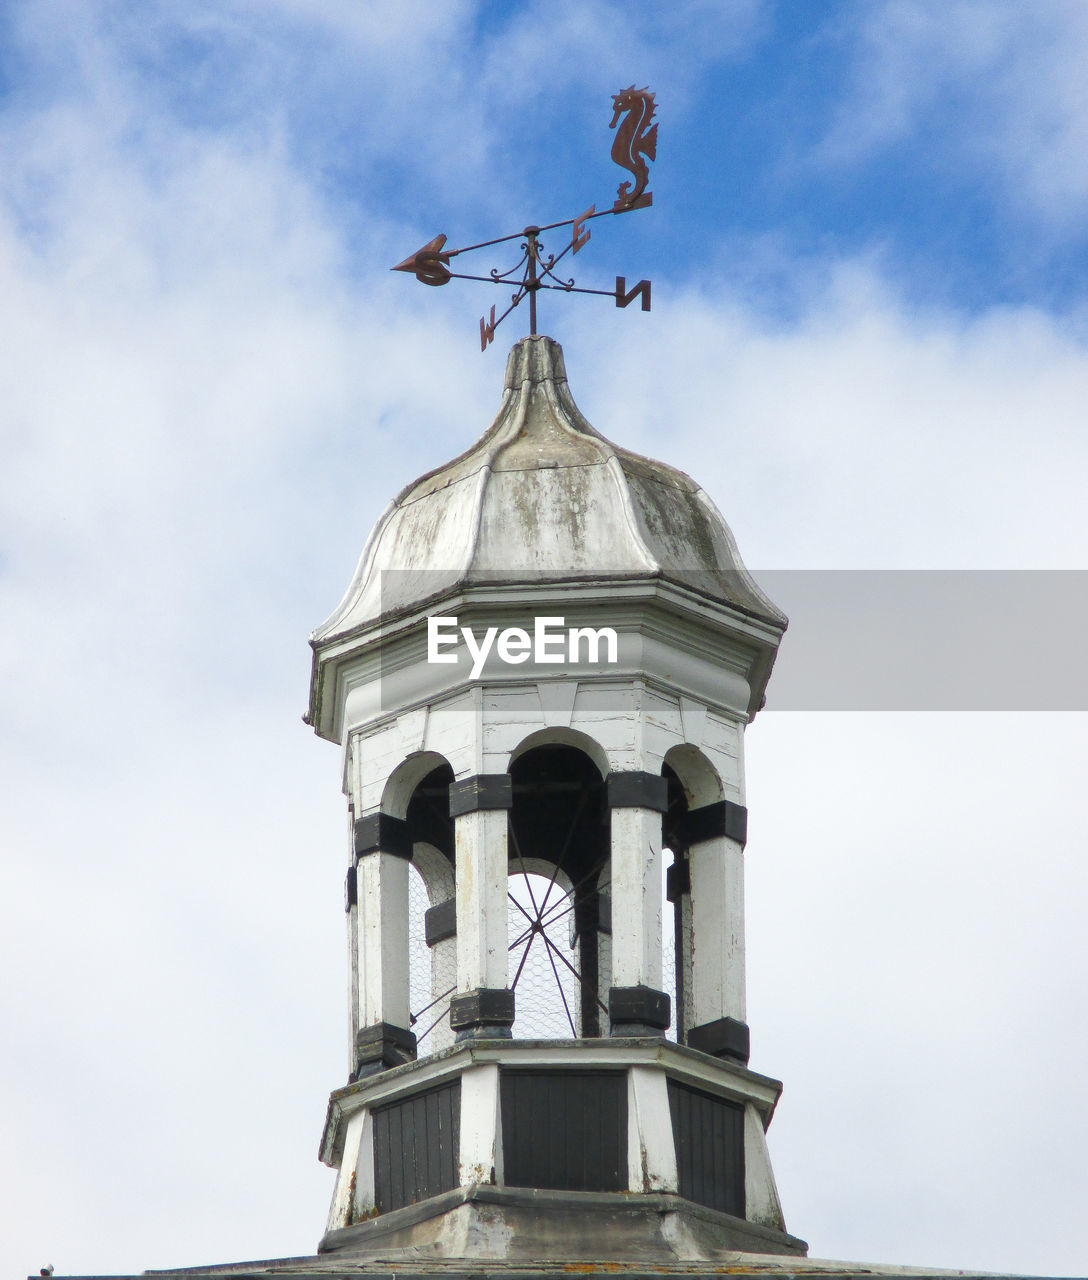 architecture, tower, sky, built structure, building exterior, weather vane, nature, steeple, cloud, no people, bell tower, landmark, low angle view, day, building, history, the past, outdoors, cross, travel destinations, religion